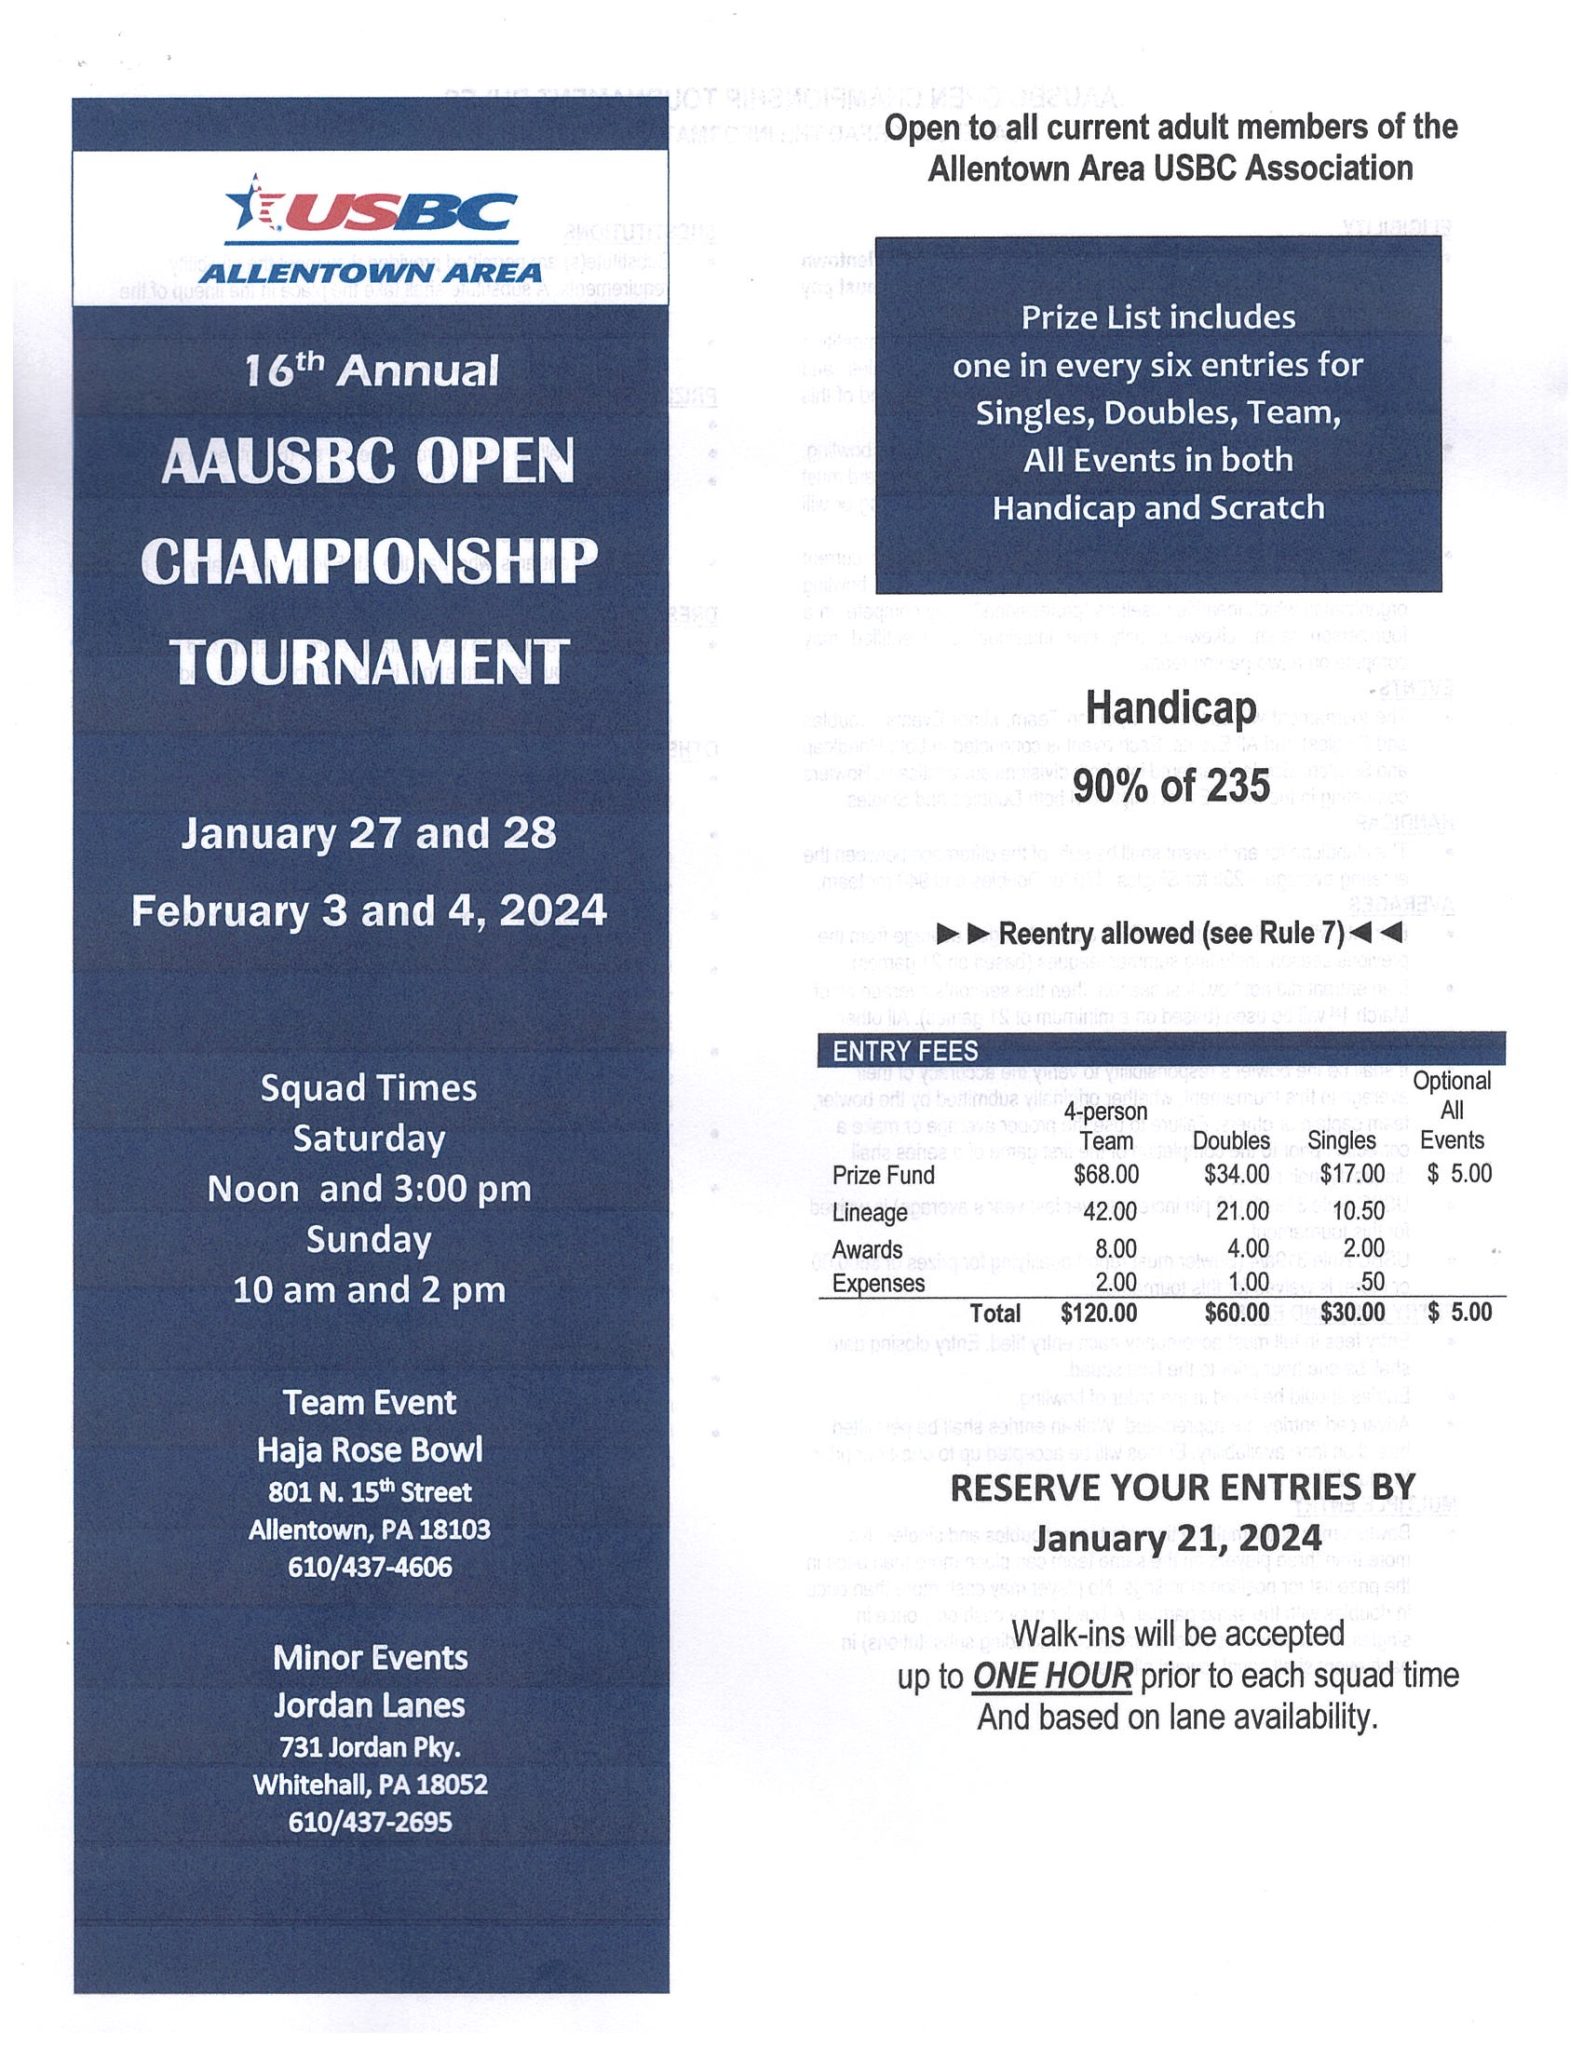 16th Annual AAUSBC Open Championship Tournament 9